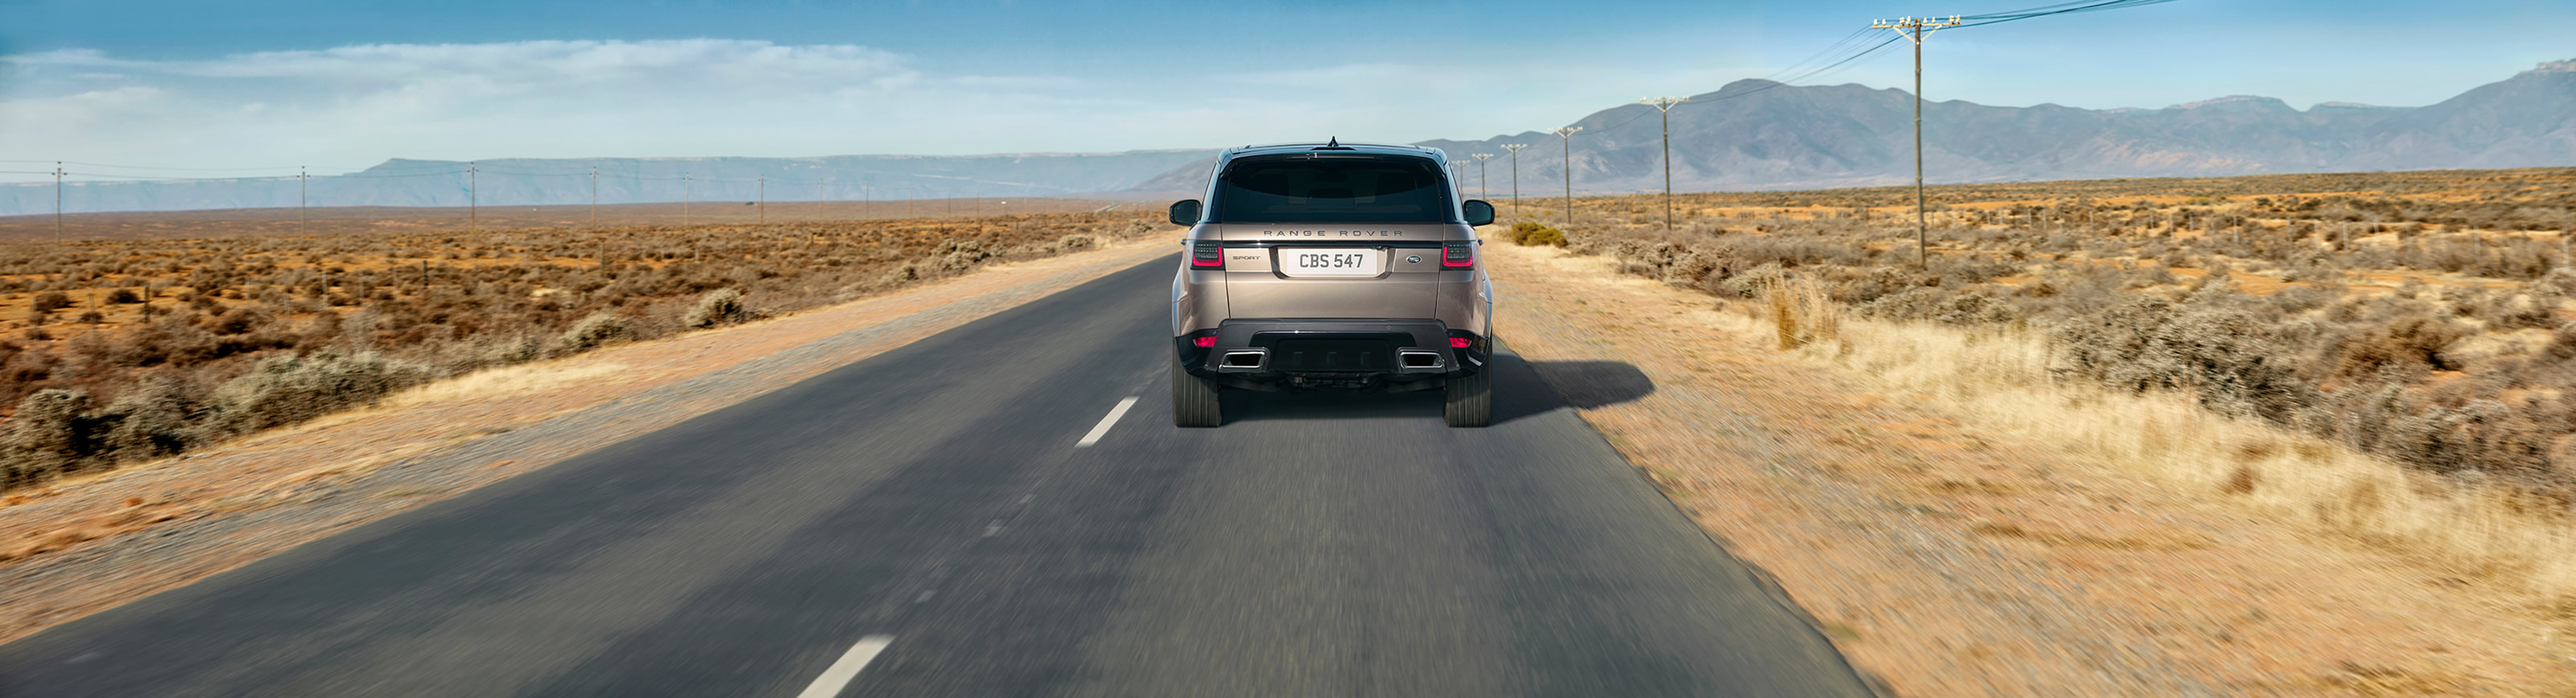 Trigger Shoots Range Rover Sport South Africa photoshoot